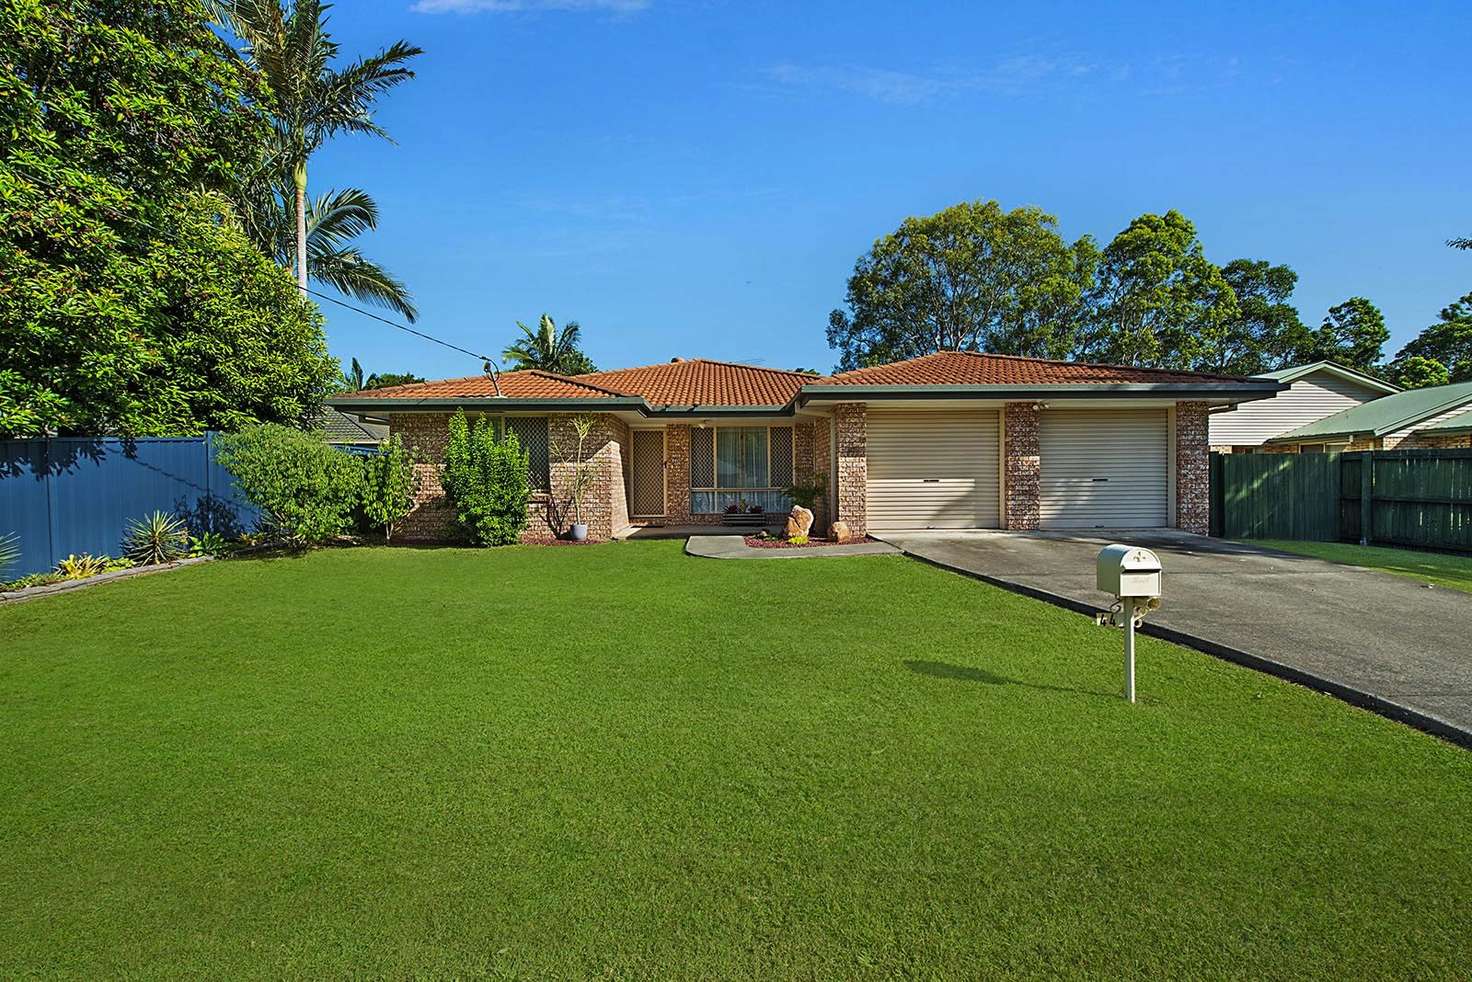 Main view of Homely house listing, 44 Xanadu Dr, Bellmere QLD 4510